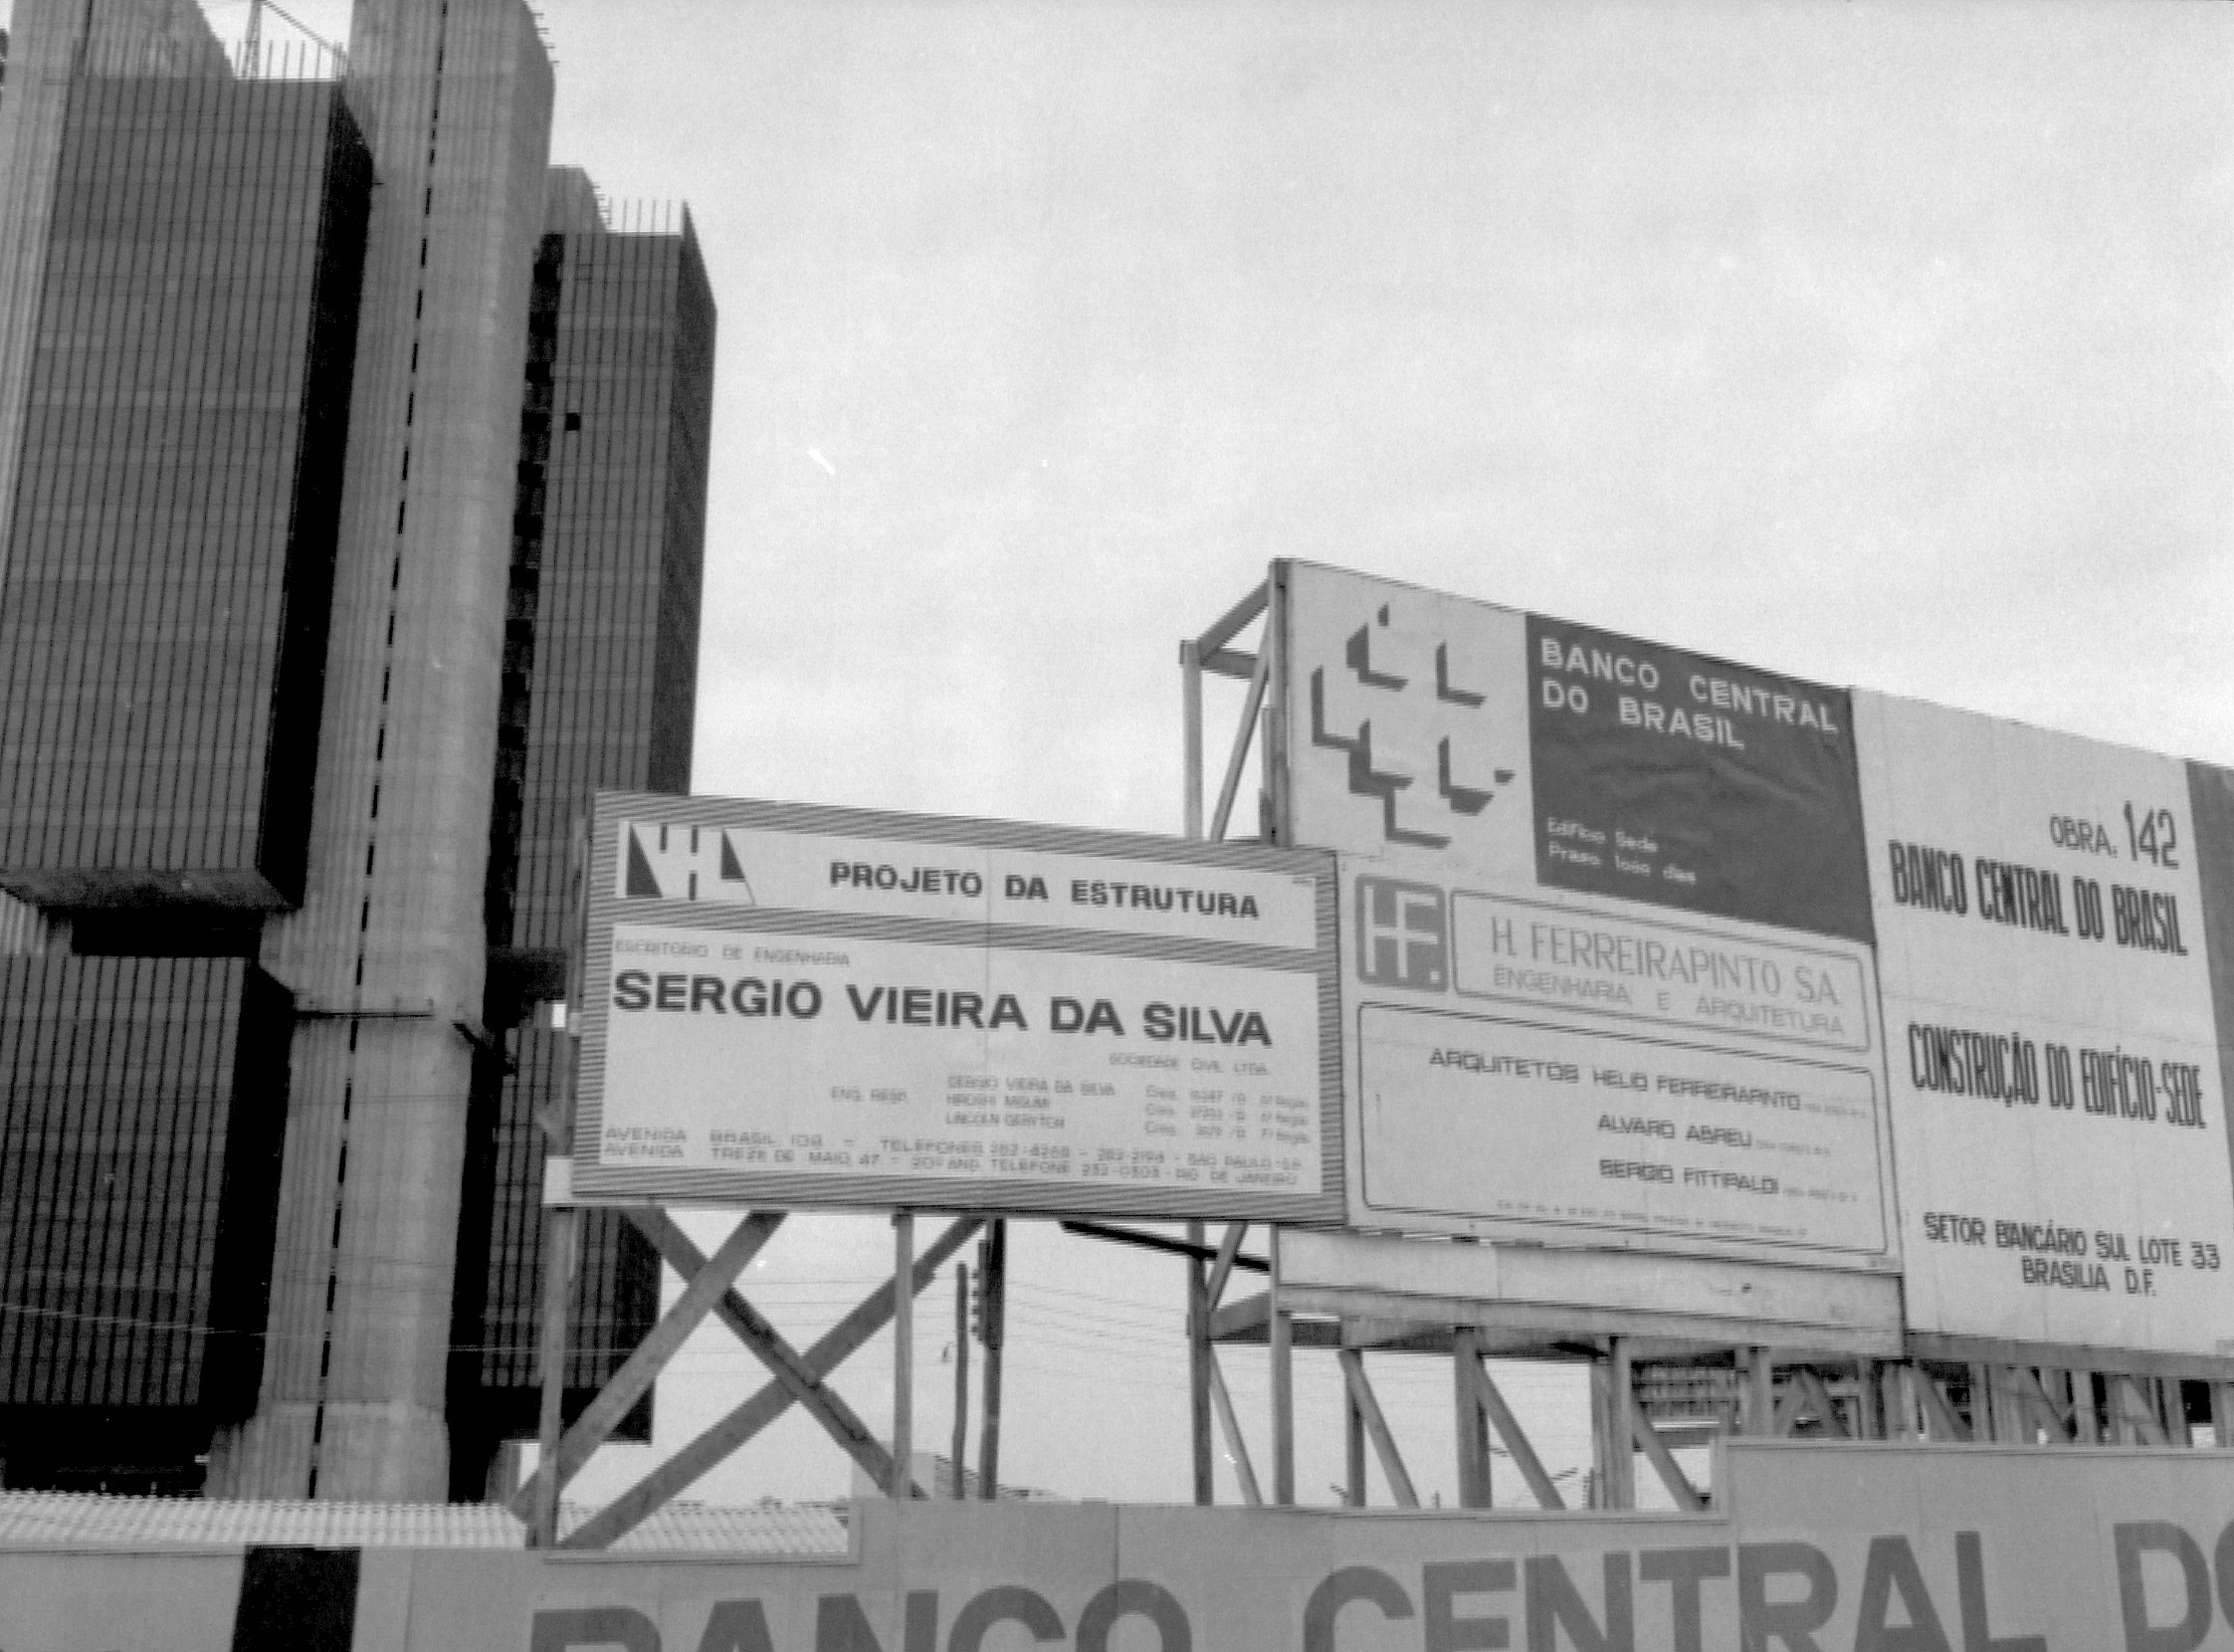 Construction of the headquarters of the Central Bank of Brazil